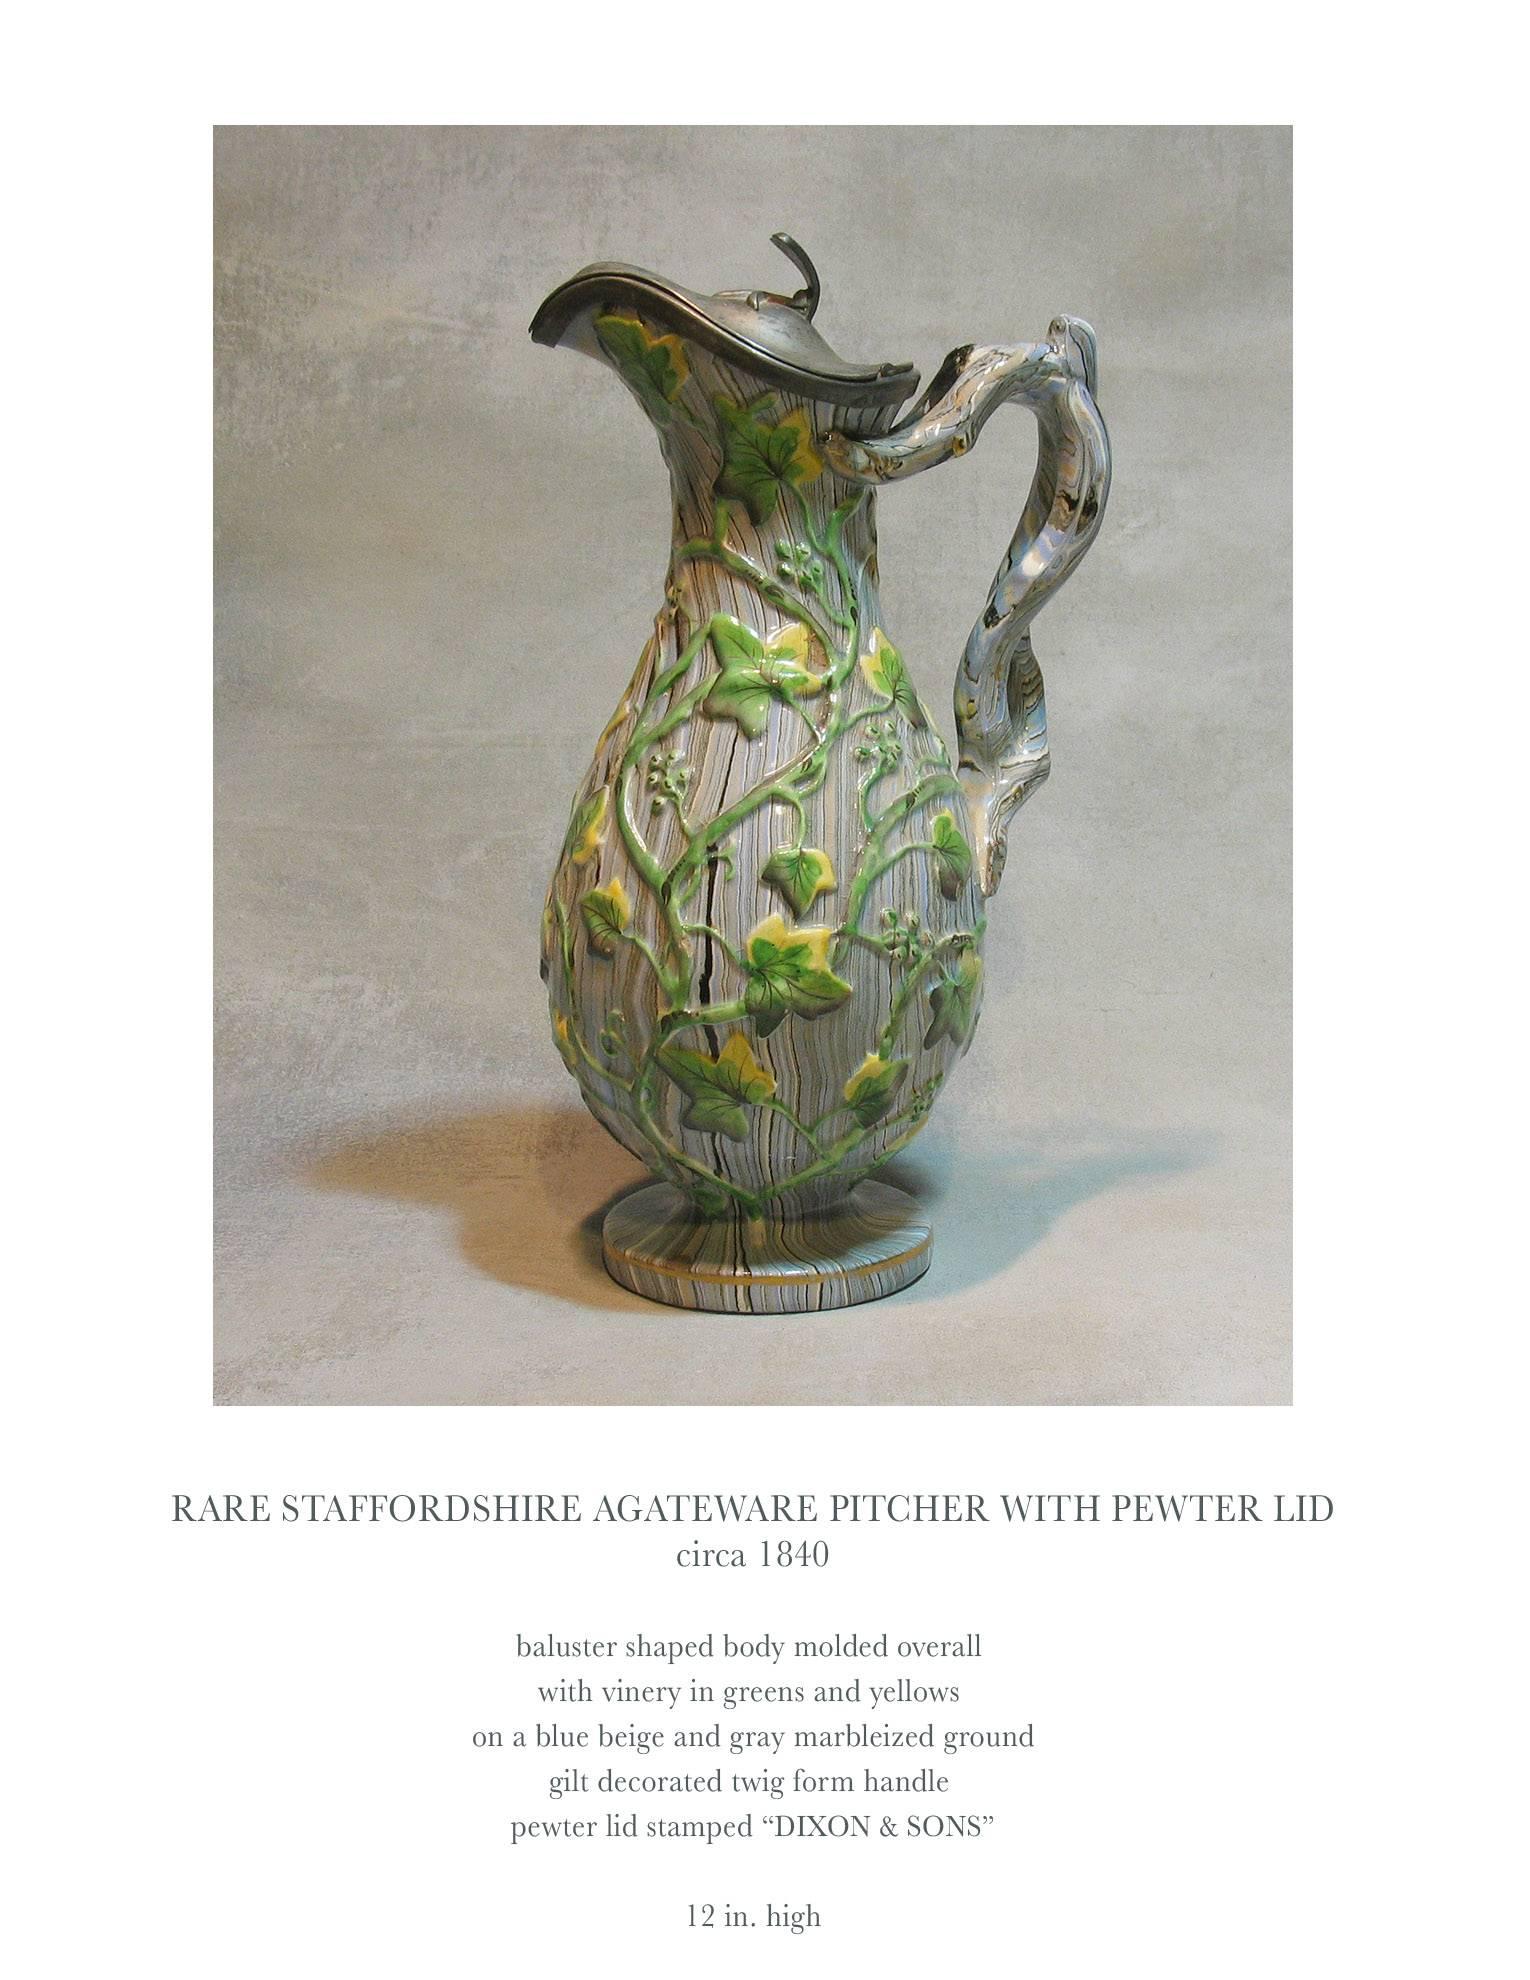 Art Nouveau Rare Staffordshire Agateware Pitcher with Pewter Lid, circa 1840 For Sale